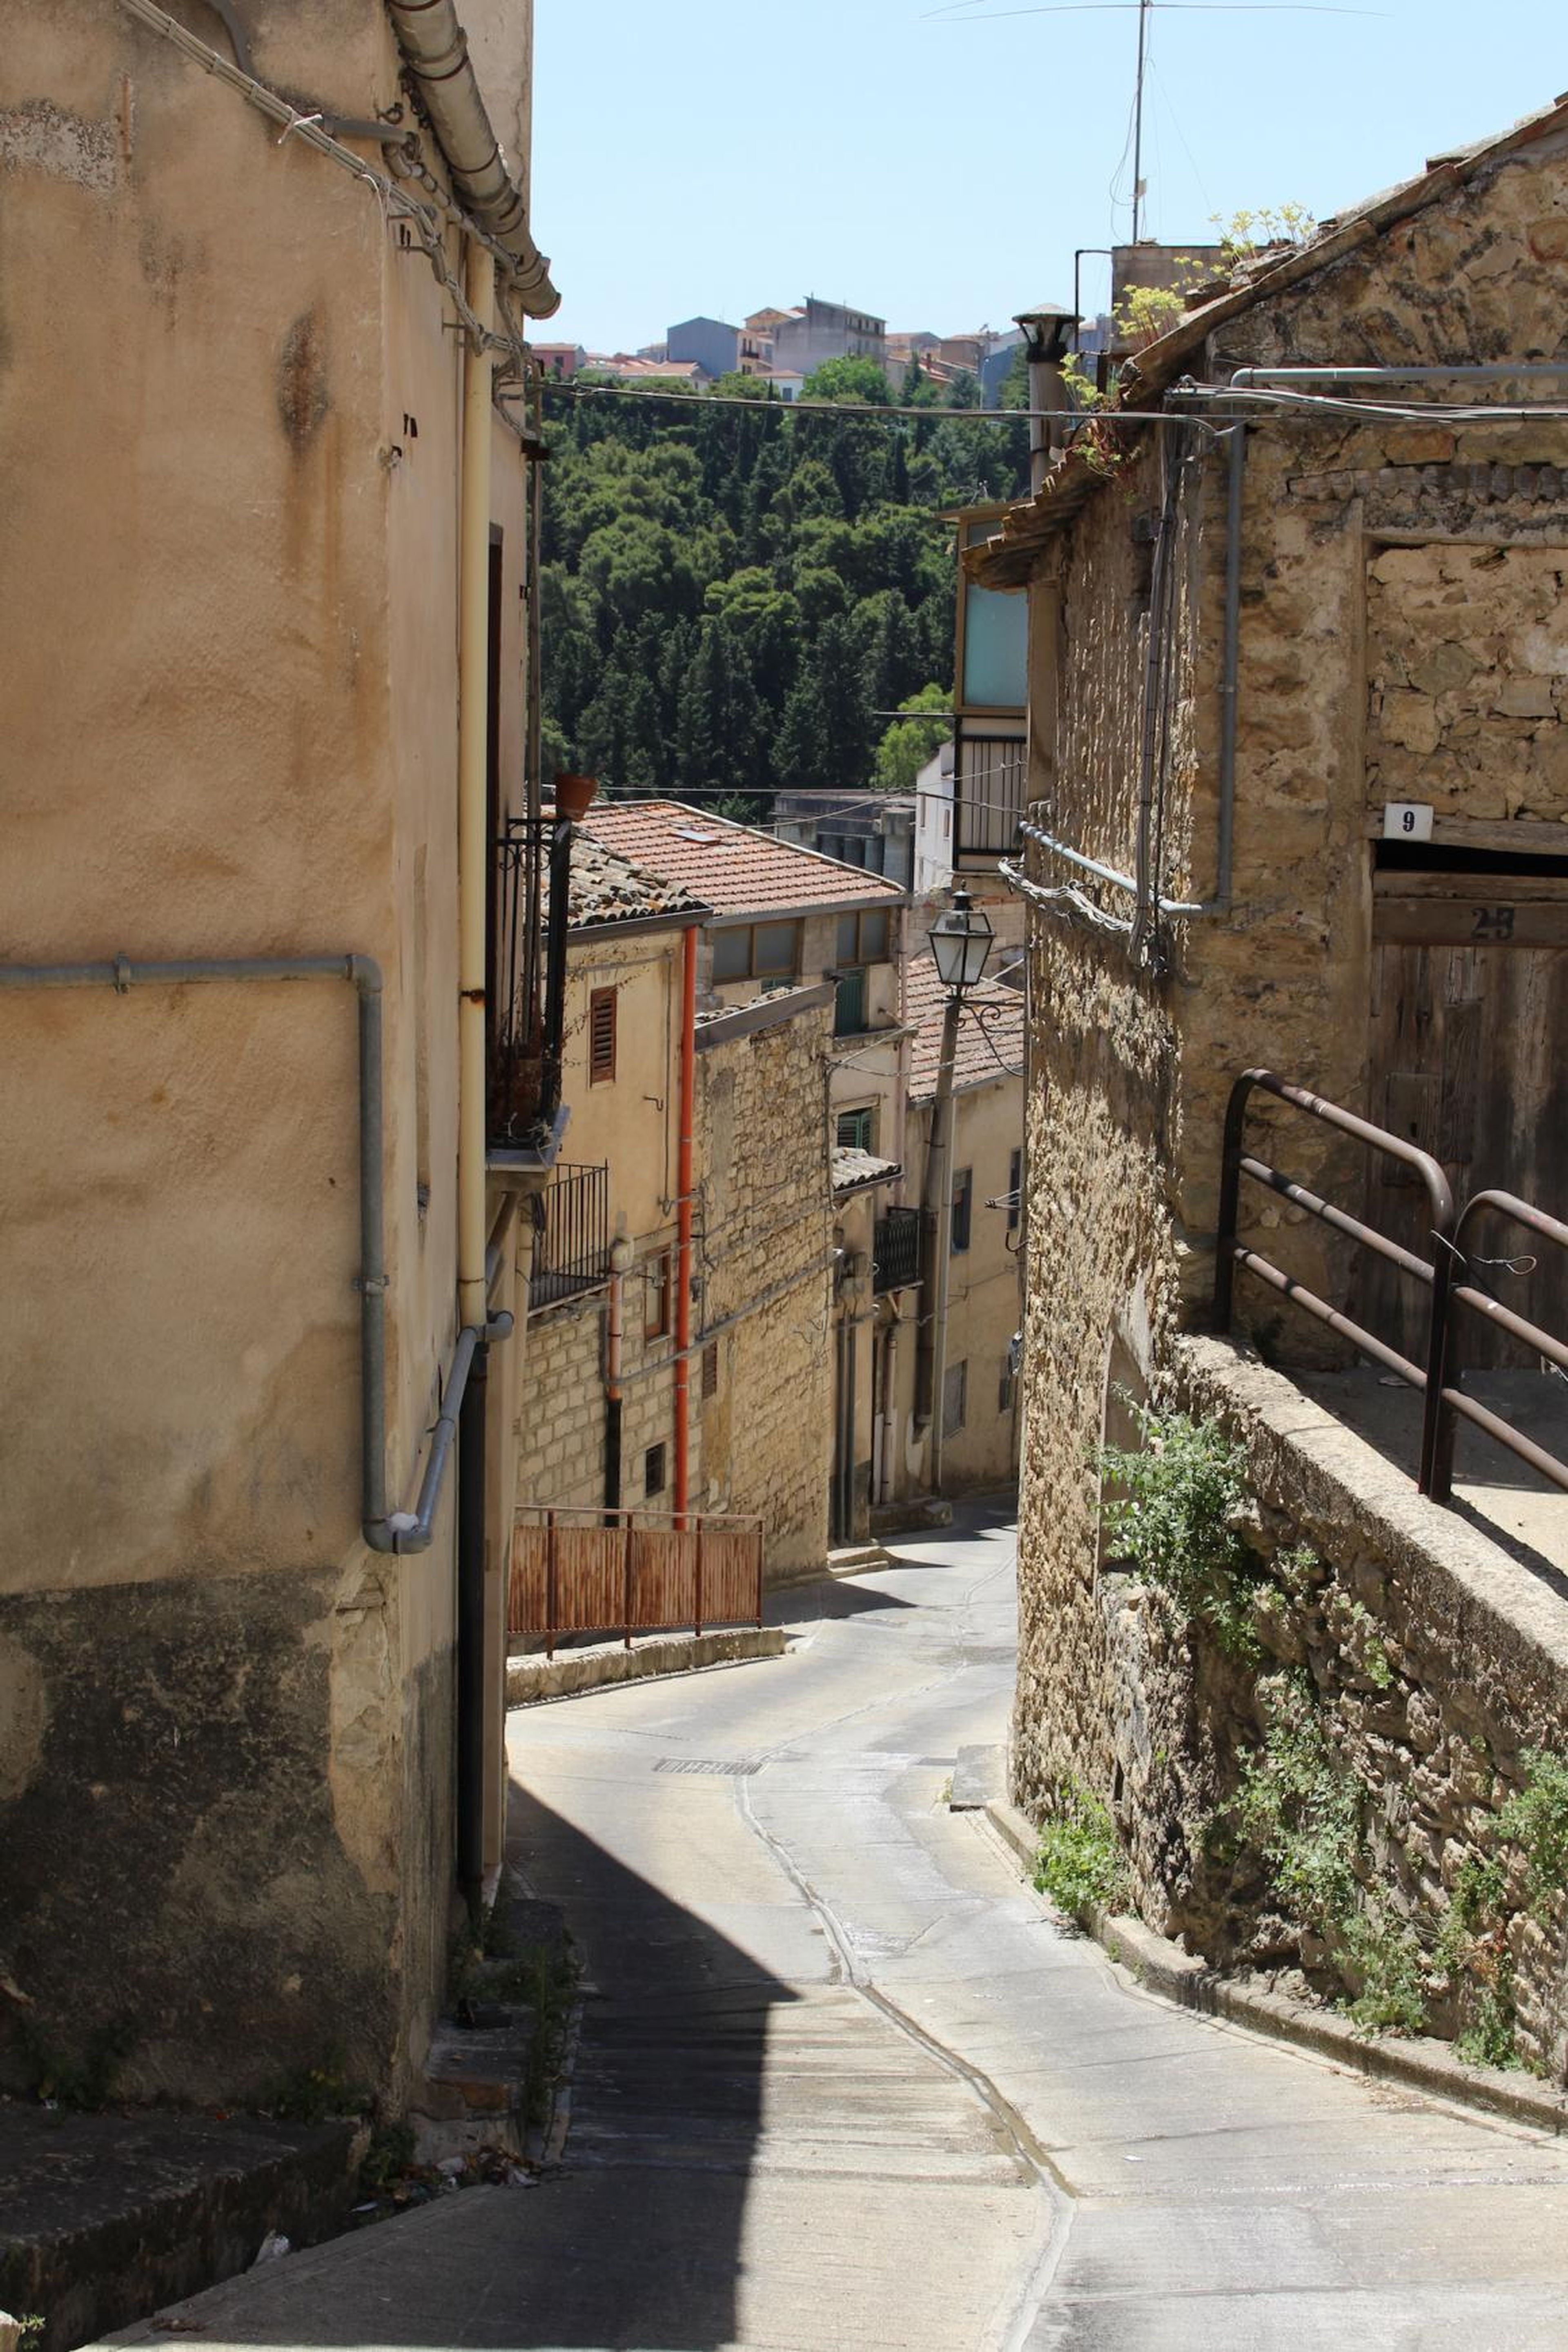 Cammarata's town councilors told me that many young people, especially with families, were deterred from living in the town because of the tiny, winding roads, which were nigh on impossible to get a car around. Instead, they lived